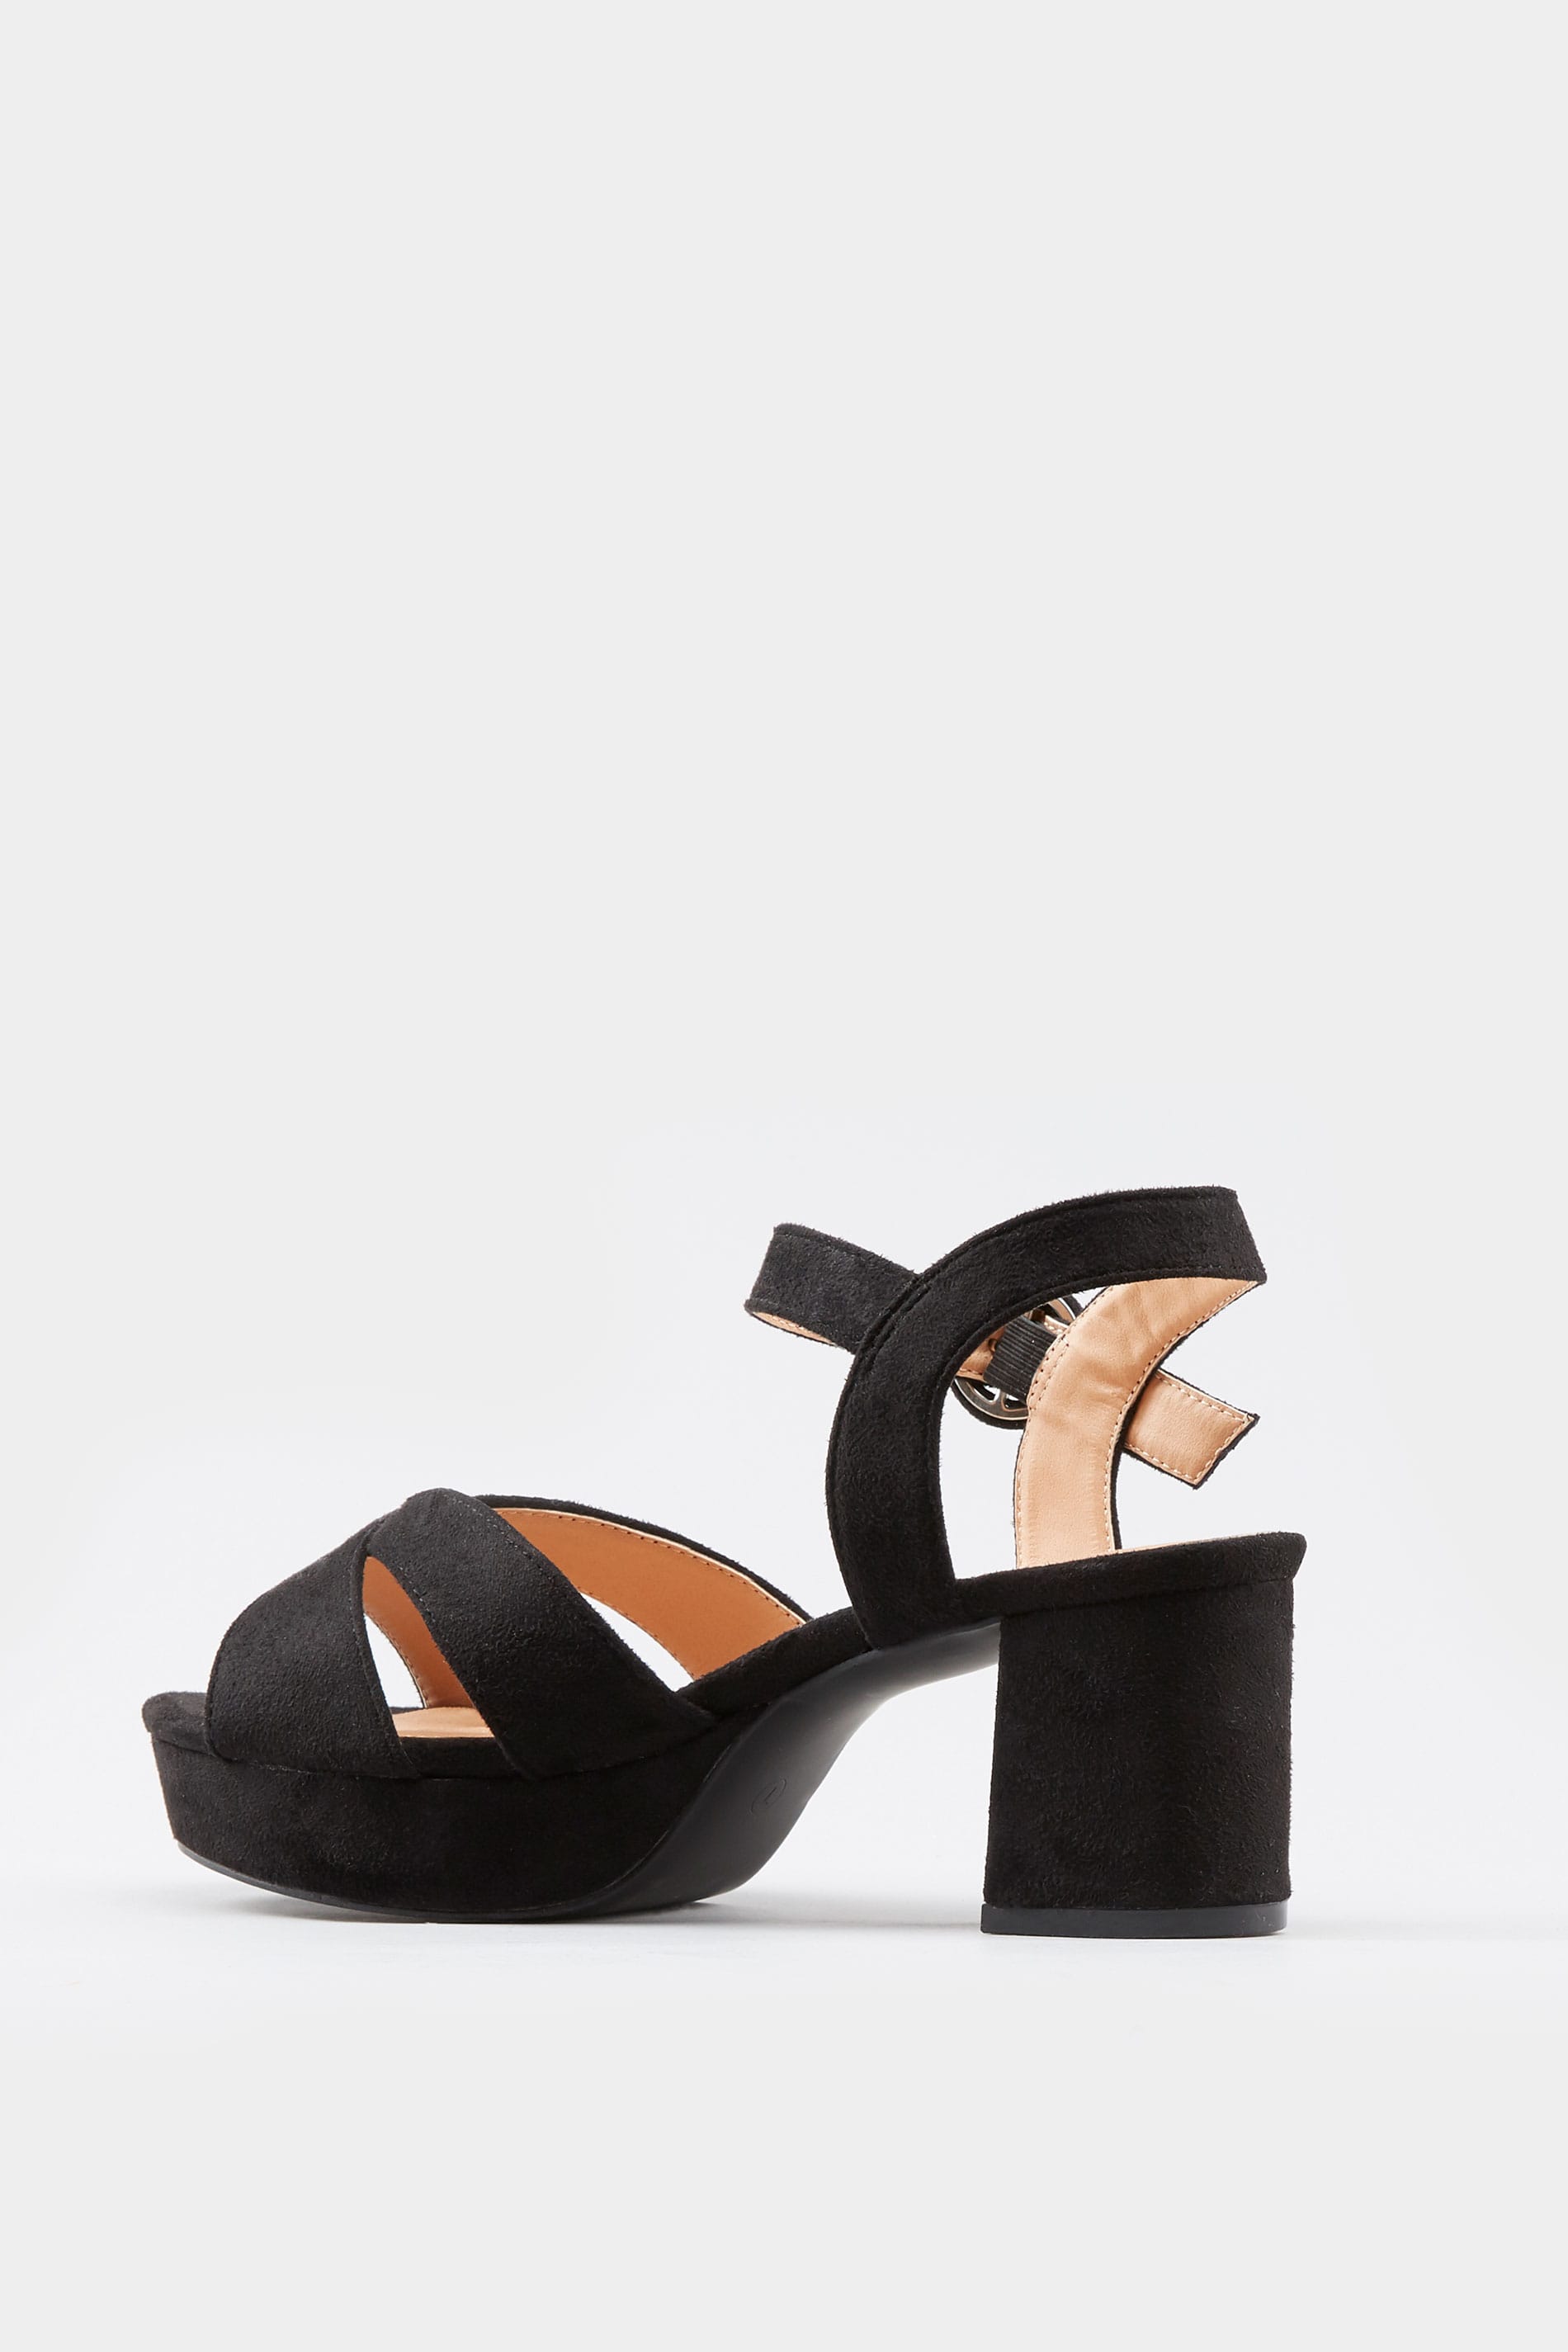 Black Platform Heeled Sandals In Extra Wide Fit | Yours Clothing